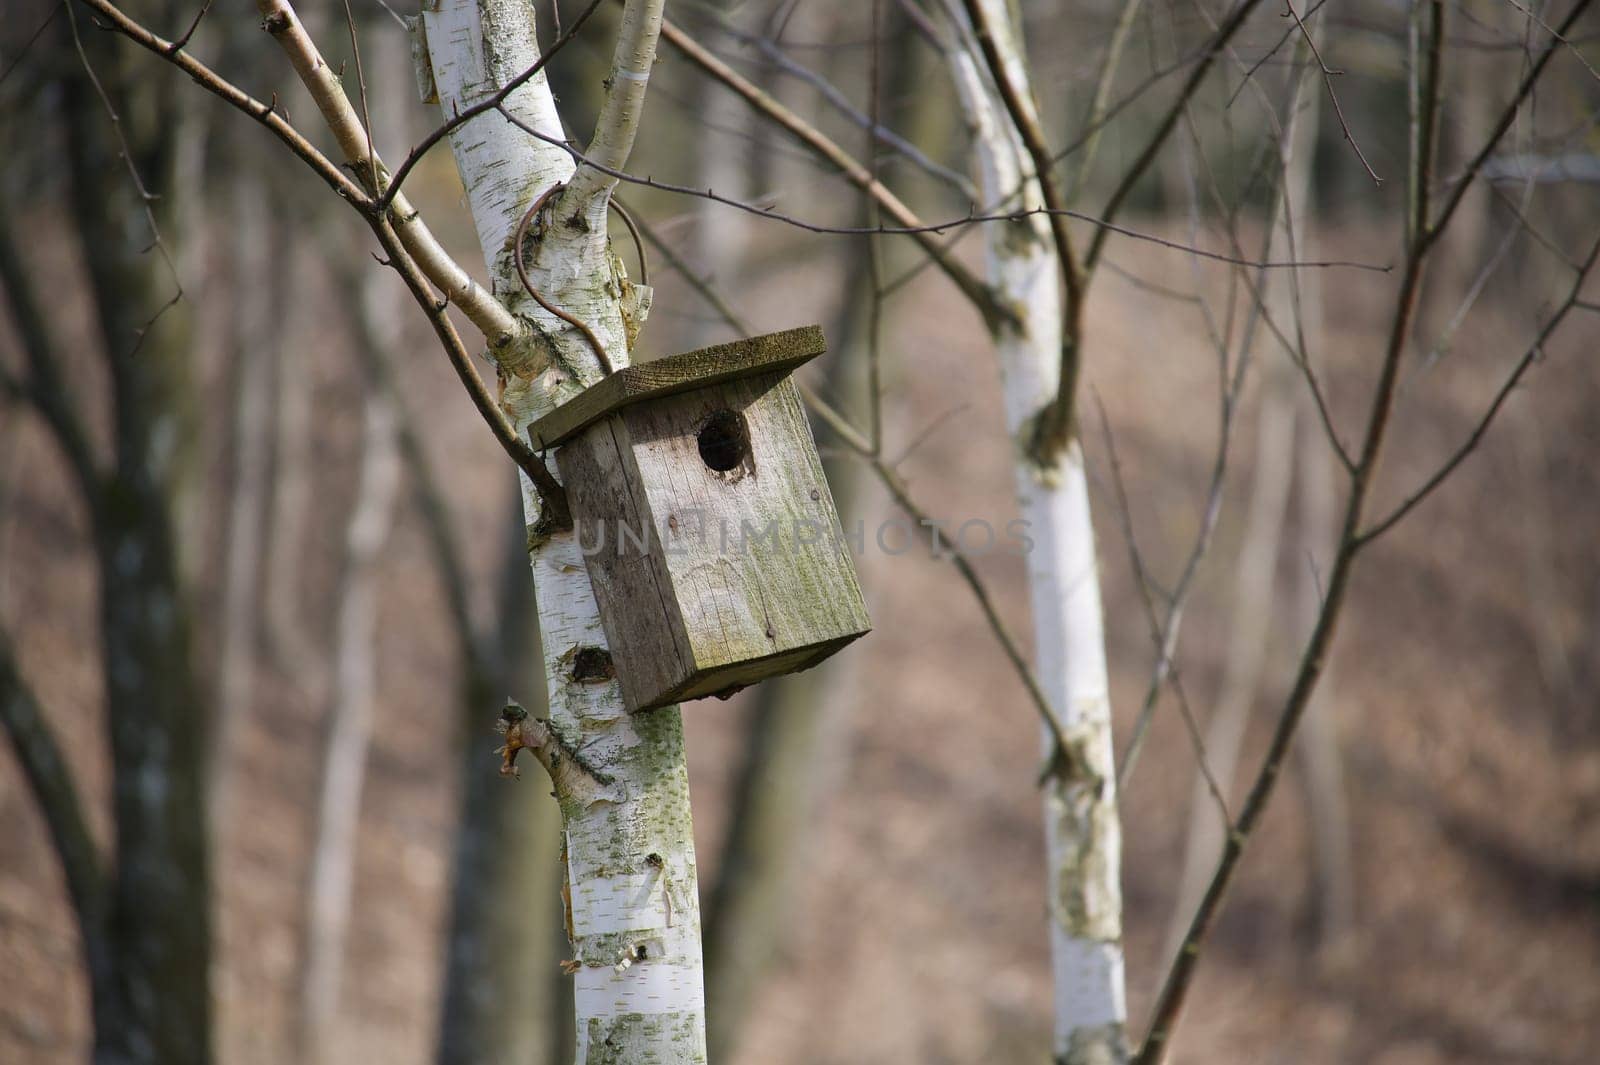 Wooden birdhouse mounted on the birch tree by NetPix